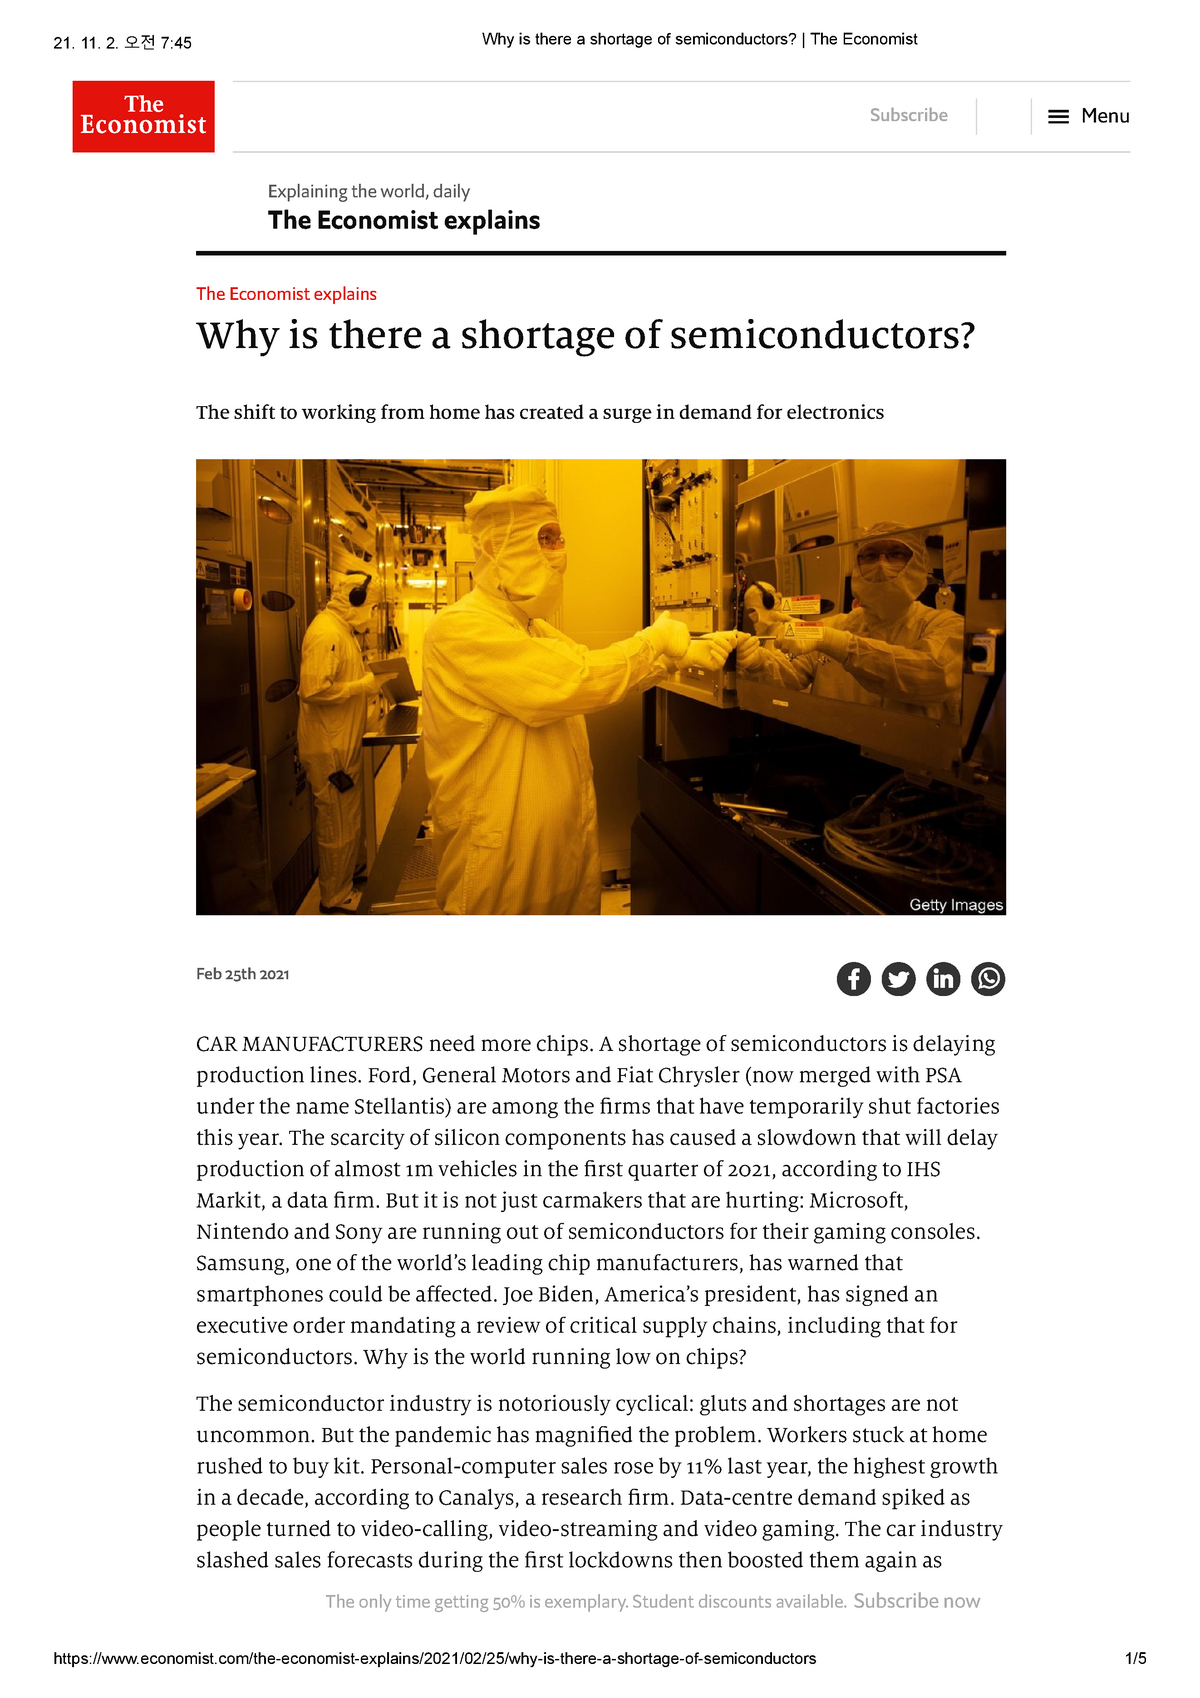 why-is-there-a-shortage-of-semiconductors-the-economist-7-45-why